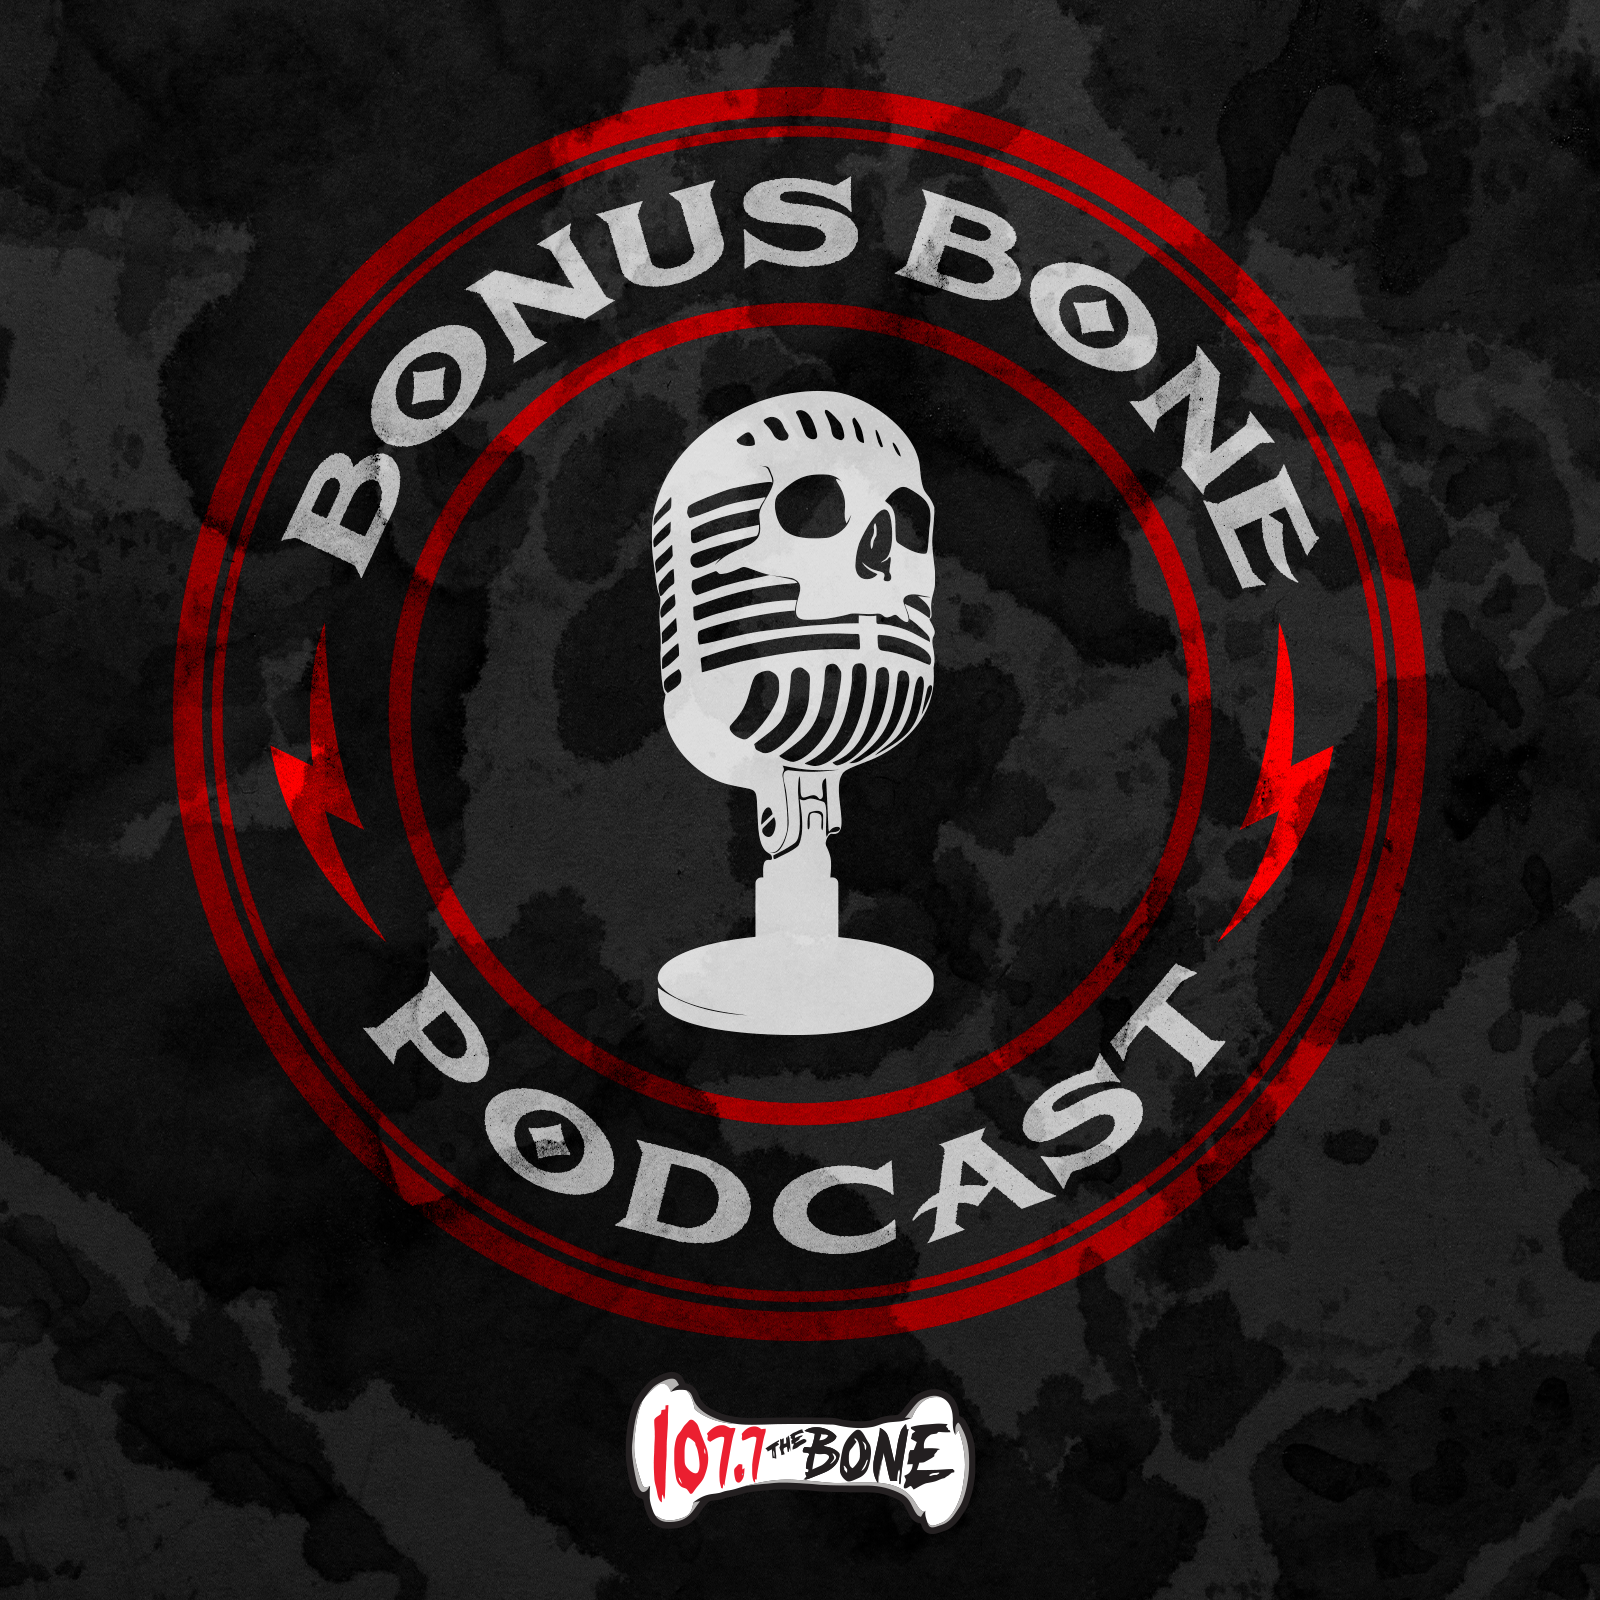 The Bonus Bone: What Was Your Almost Famous Moment?